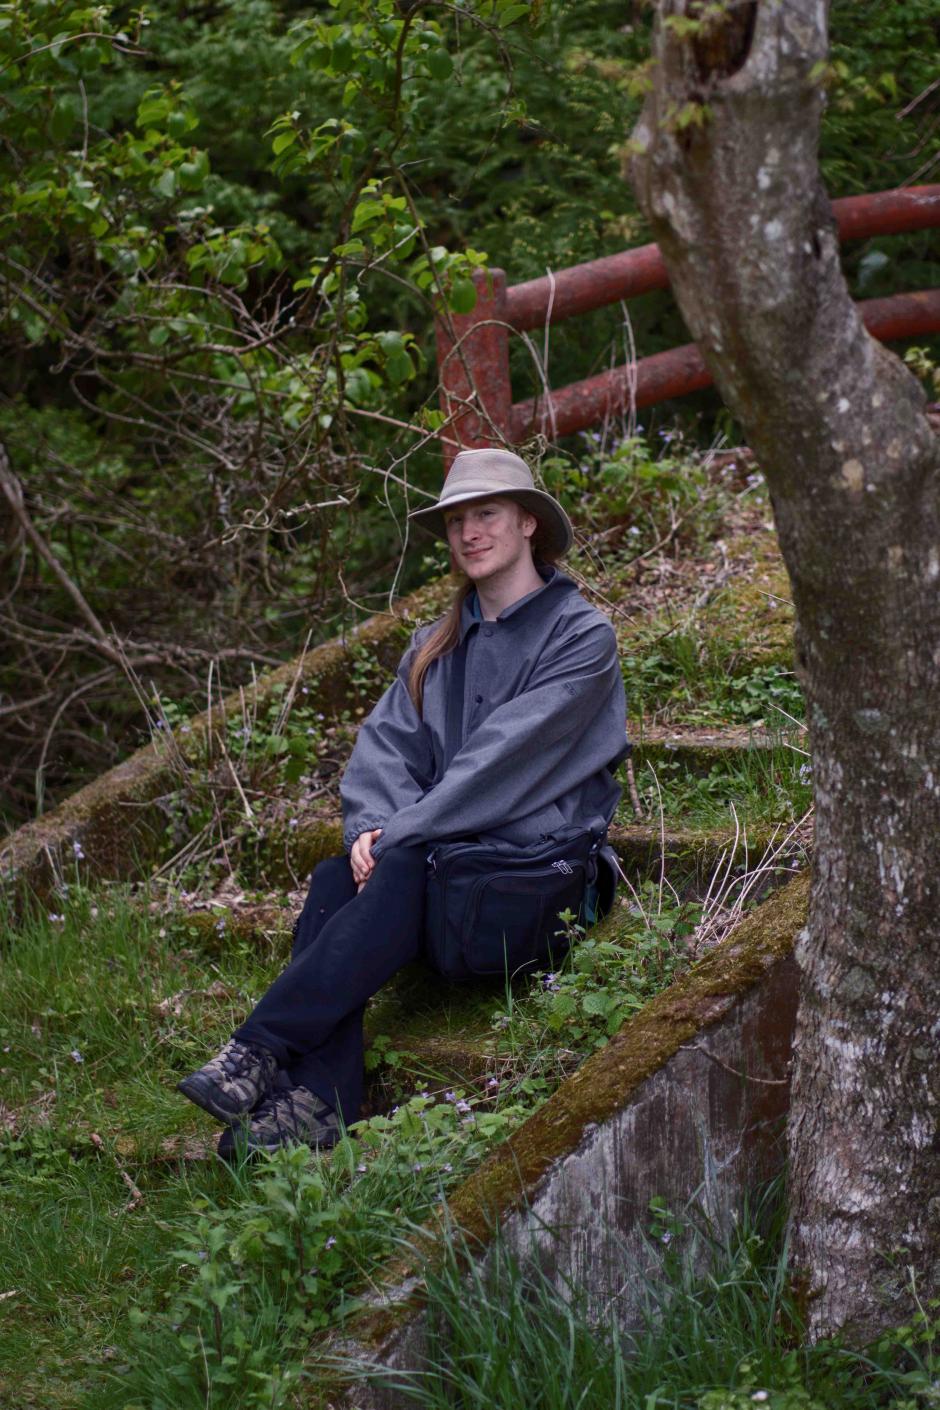 Cole Dorchester sitting outside on stairs overgrown with grass in a forest